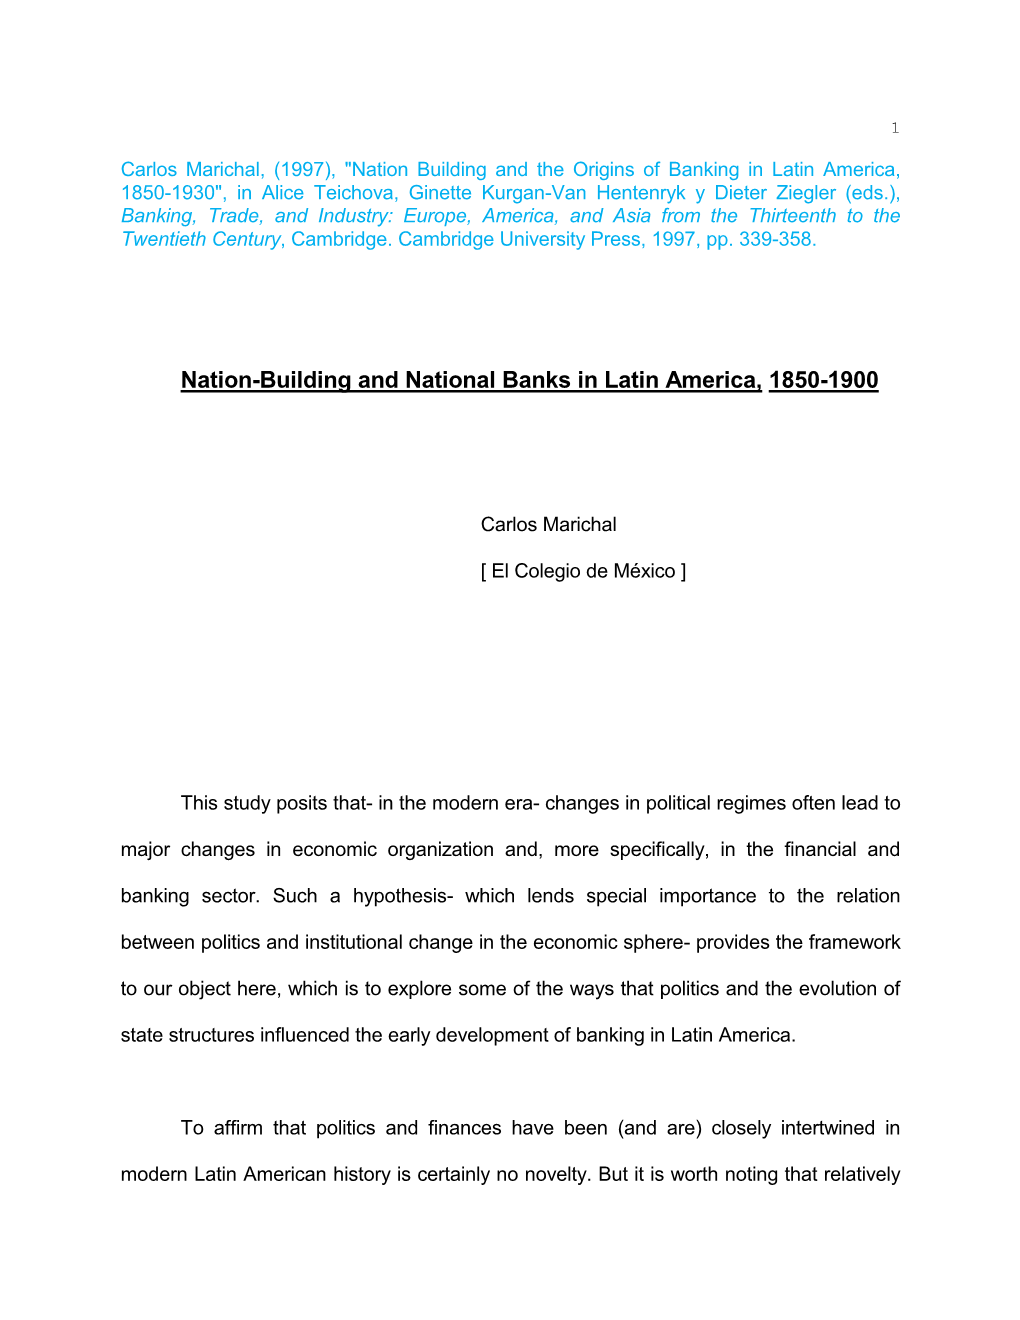 Nation-Building and National Banks in Latin America, 1850-1900